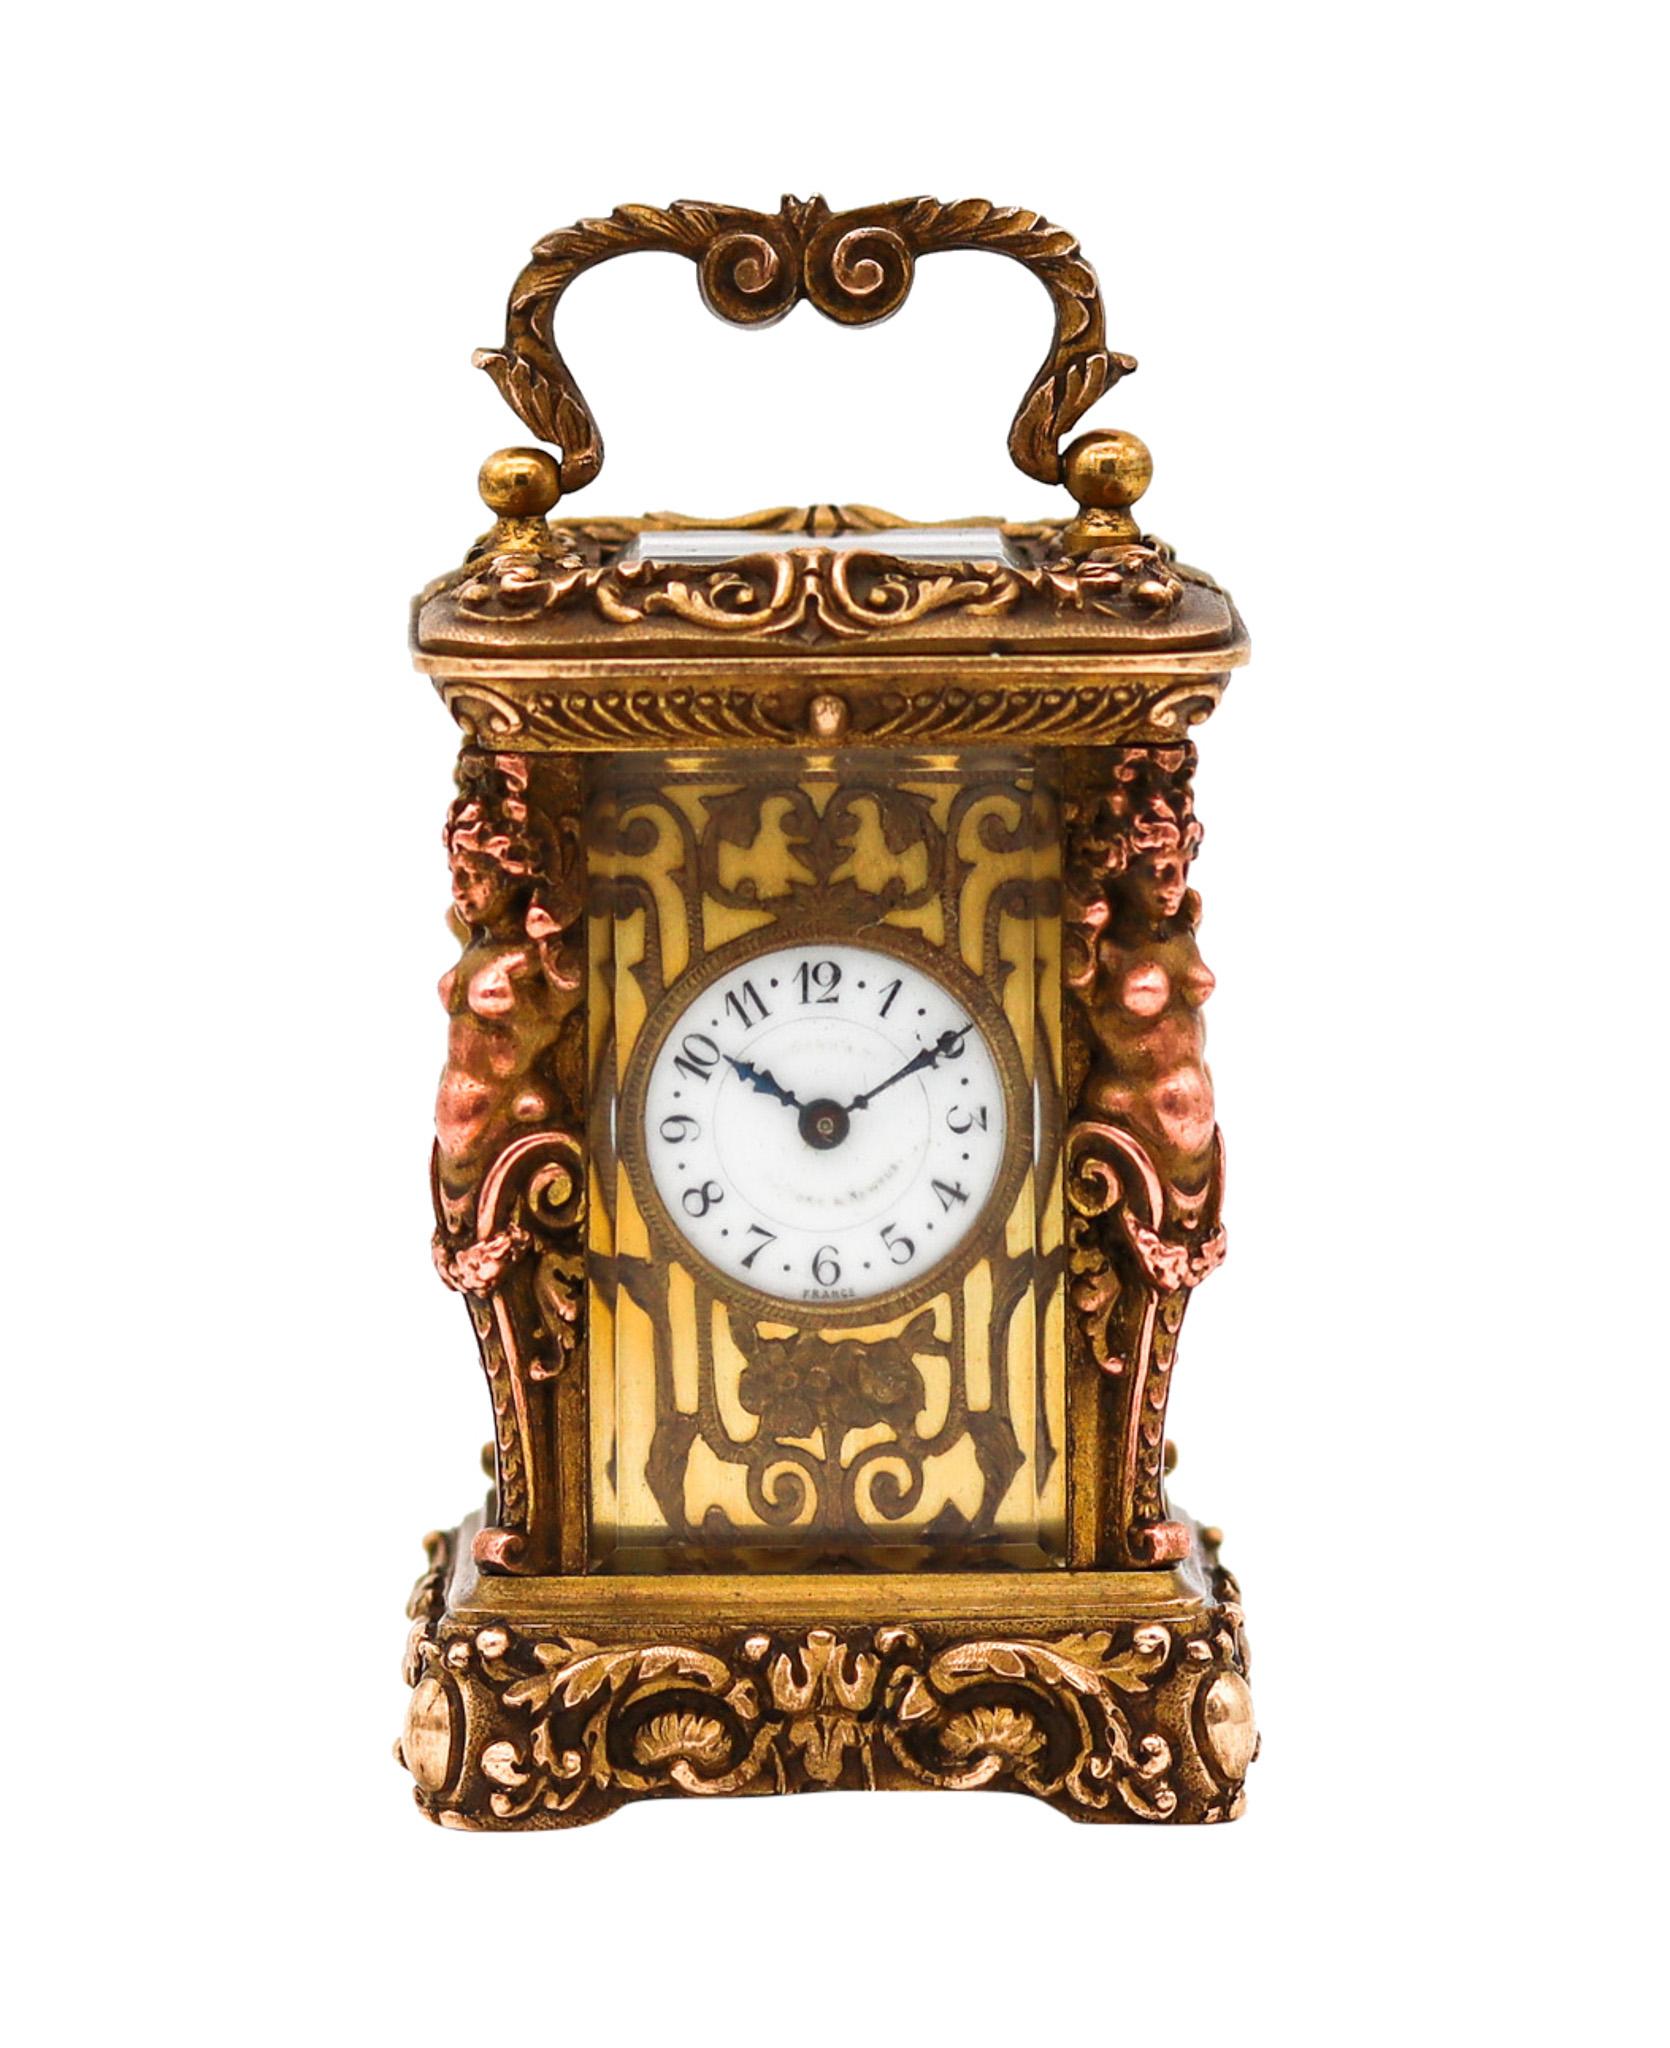 Neoclassical Charles Hour 1870 French Neo Classic Miniature Carriage Travel Clock Gilt Ormolu